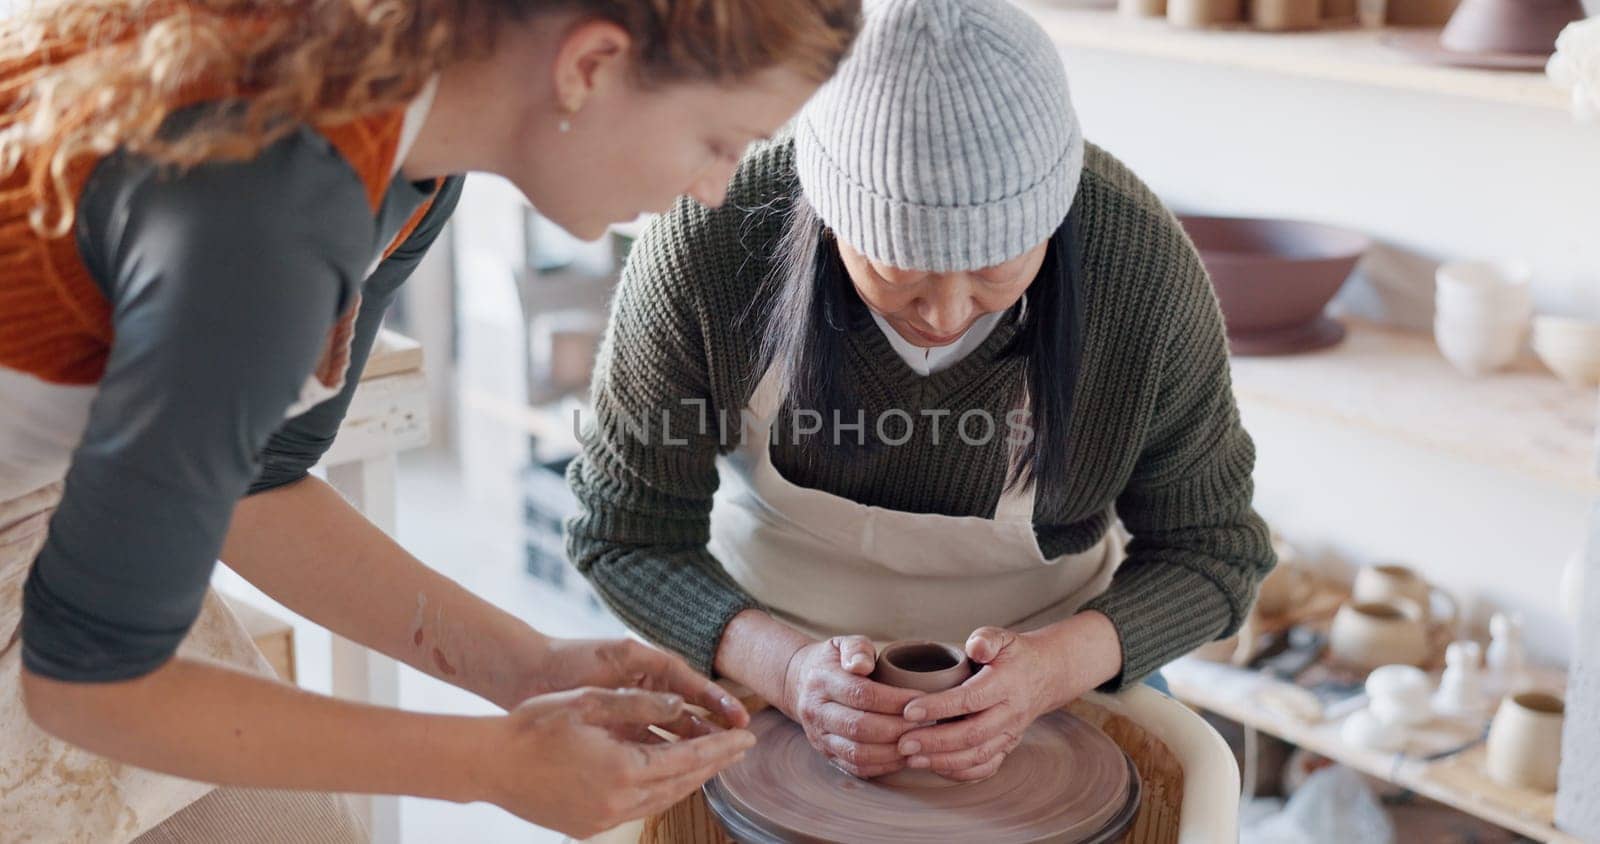 Pottery teacher, studio and workshop learning, training and teaching to seniorwoman on craft wheel for creativity, clay and sculpture process. Artist helping student in class, design and creative mol.